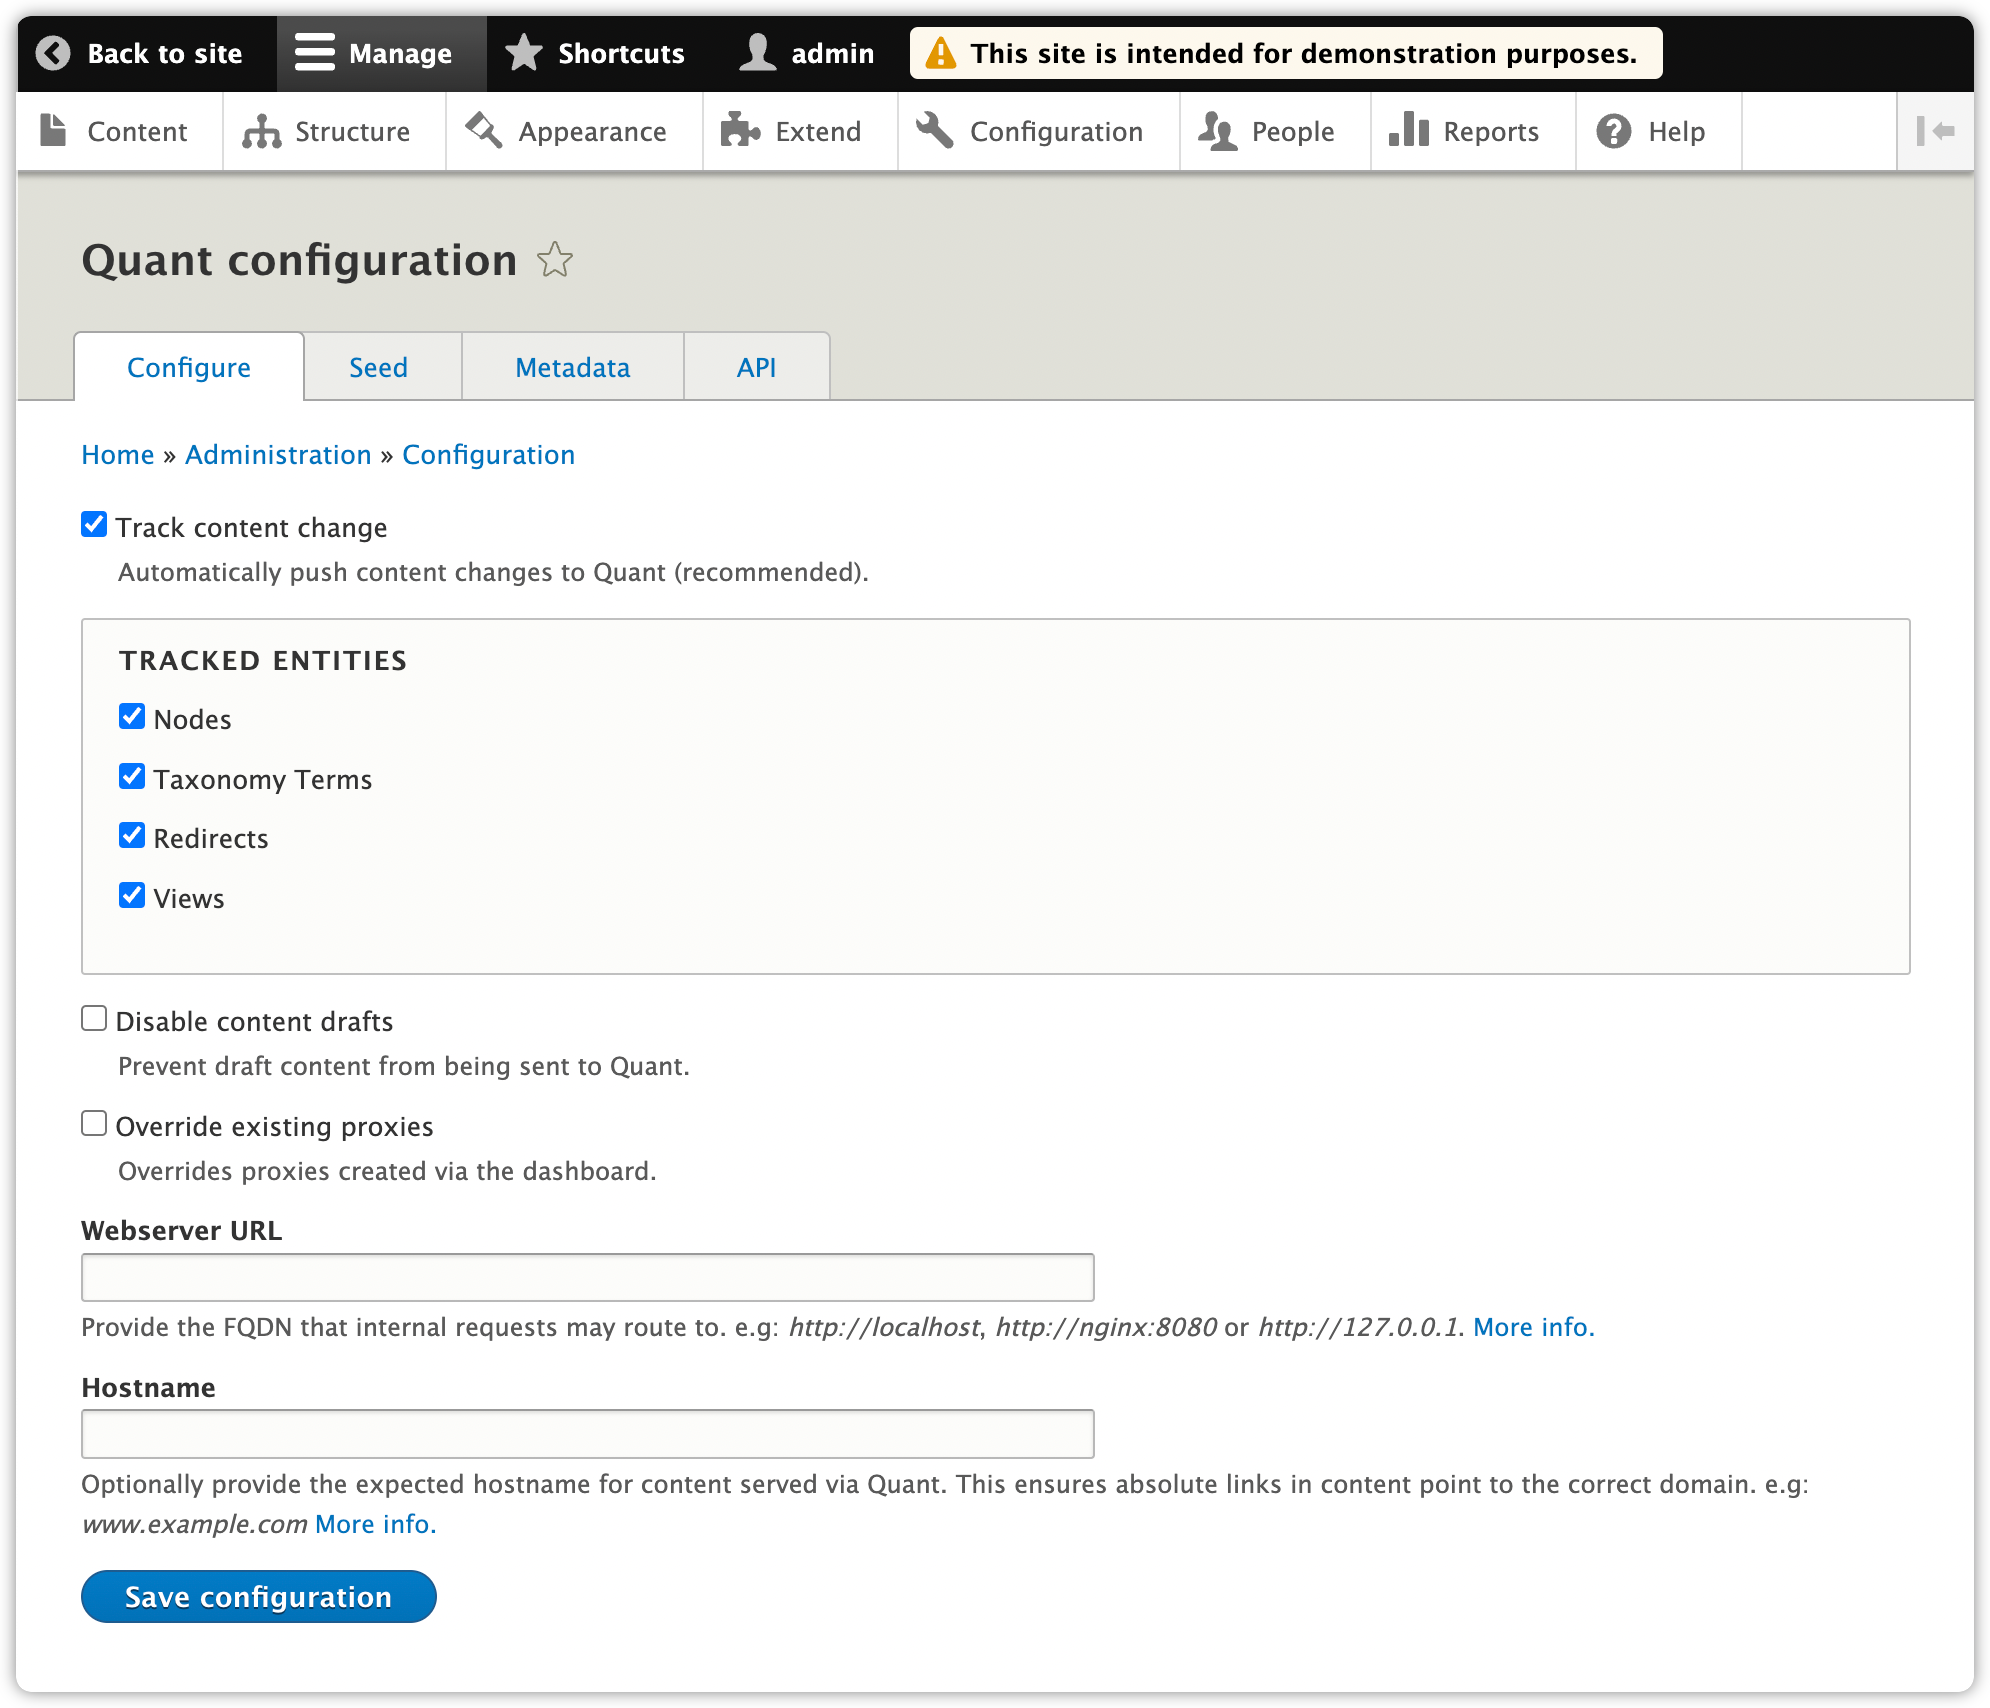 Quant Drupal 8/9 configuration page upon install